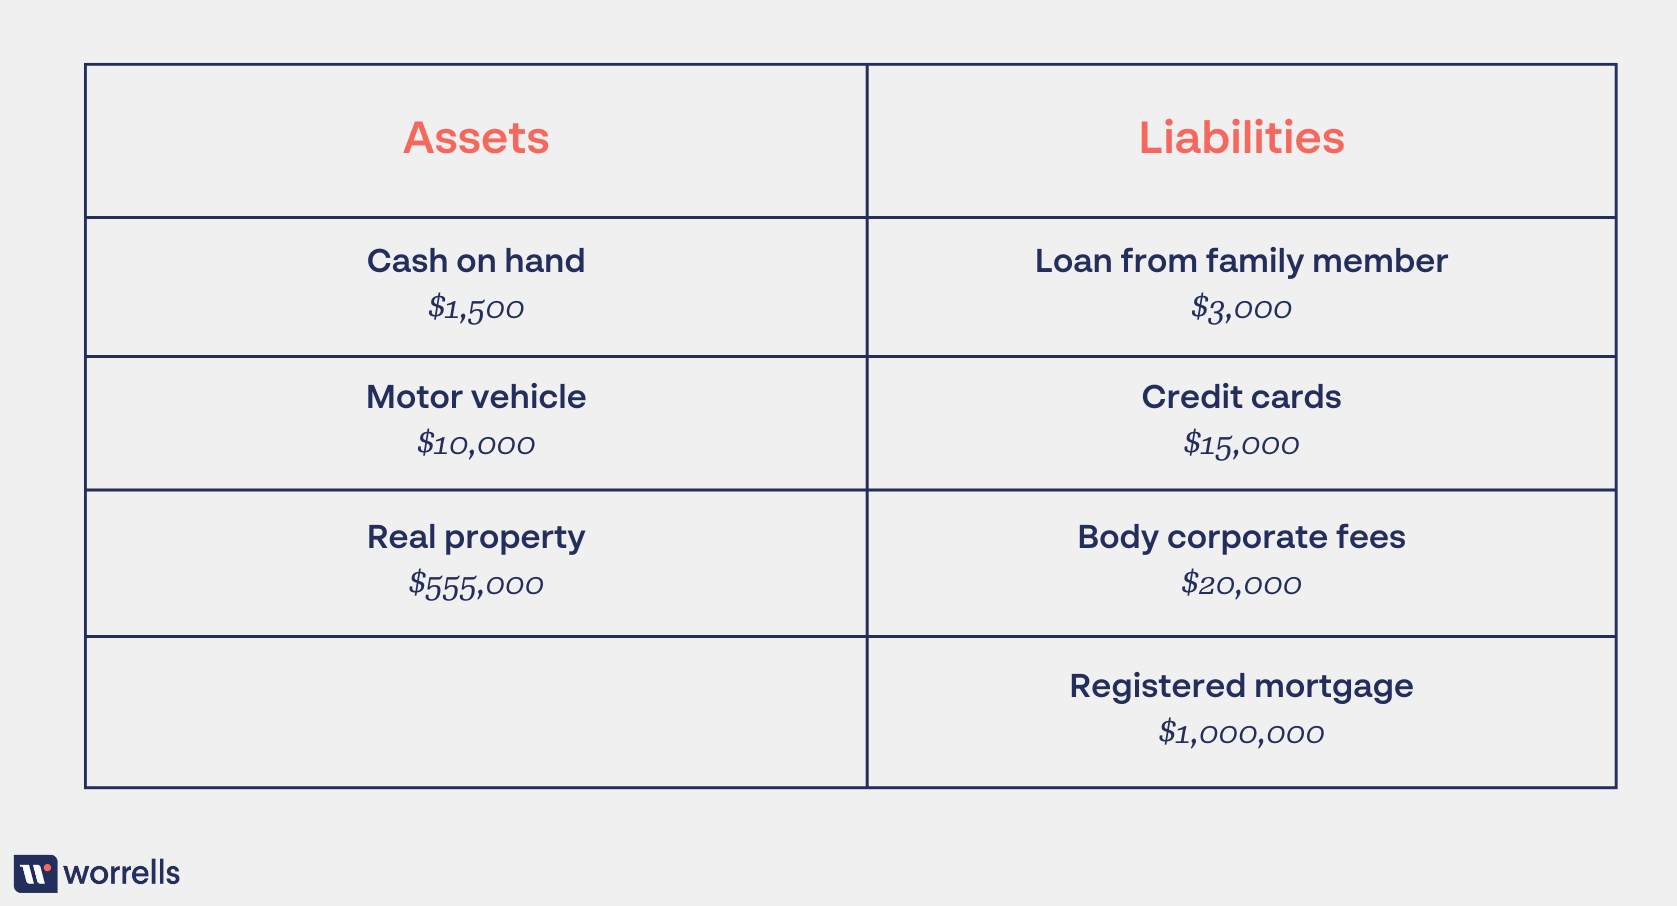 Table demonstrating the bankrupt's financial position. Assets: Cash on hand - $1500, Motor vehicle - $10000, Real property - $555000. Liabilities: Loan from family member - $3000, credit cards - $15000, body corporate fees - $20000, registered mortgage - $1000000